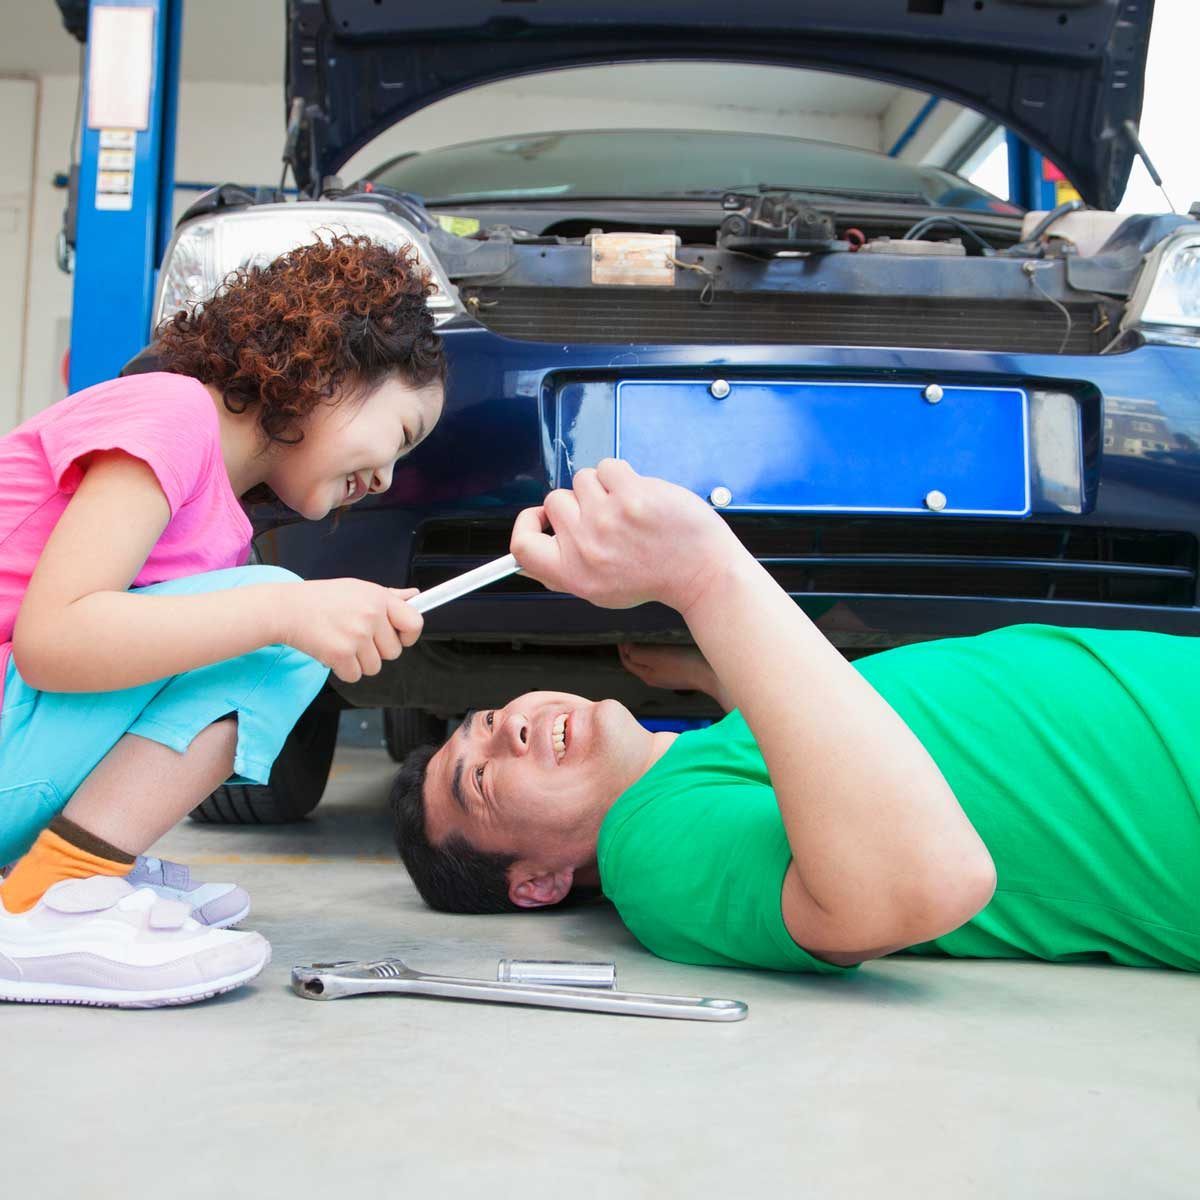 8 Things I Wish I Knew Before Changing My Own Oil